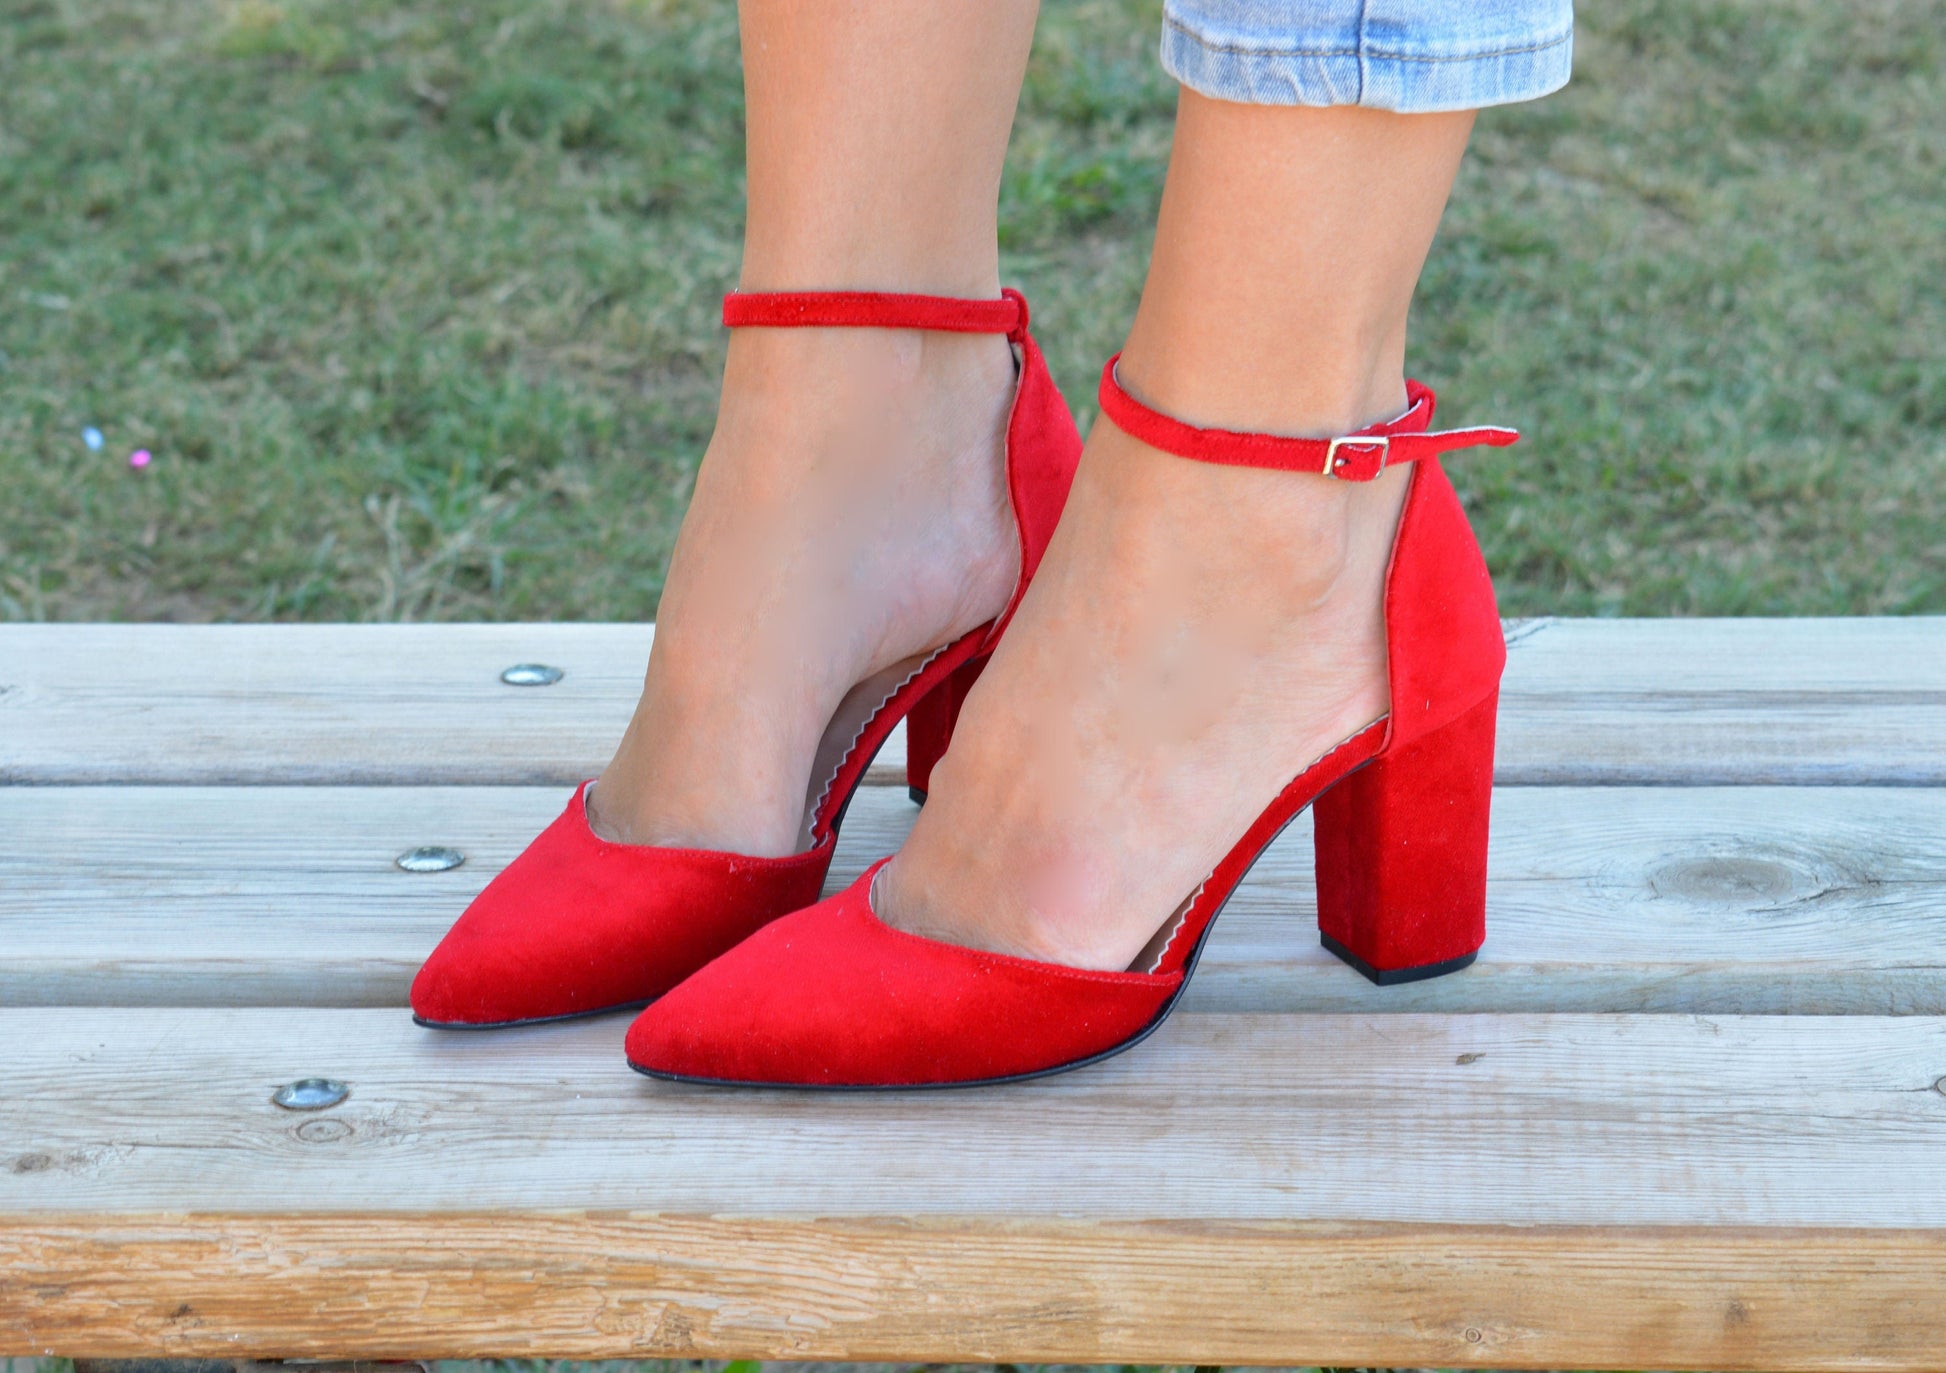 Red block Heels | Fashion shoes, Red shoes, Heels